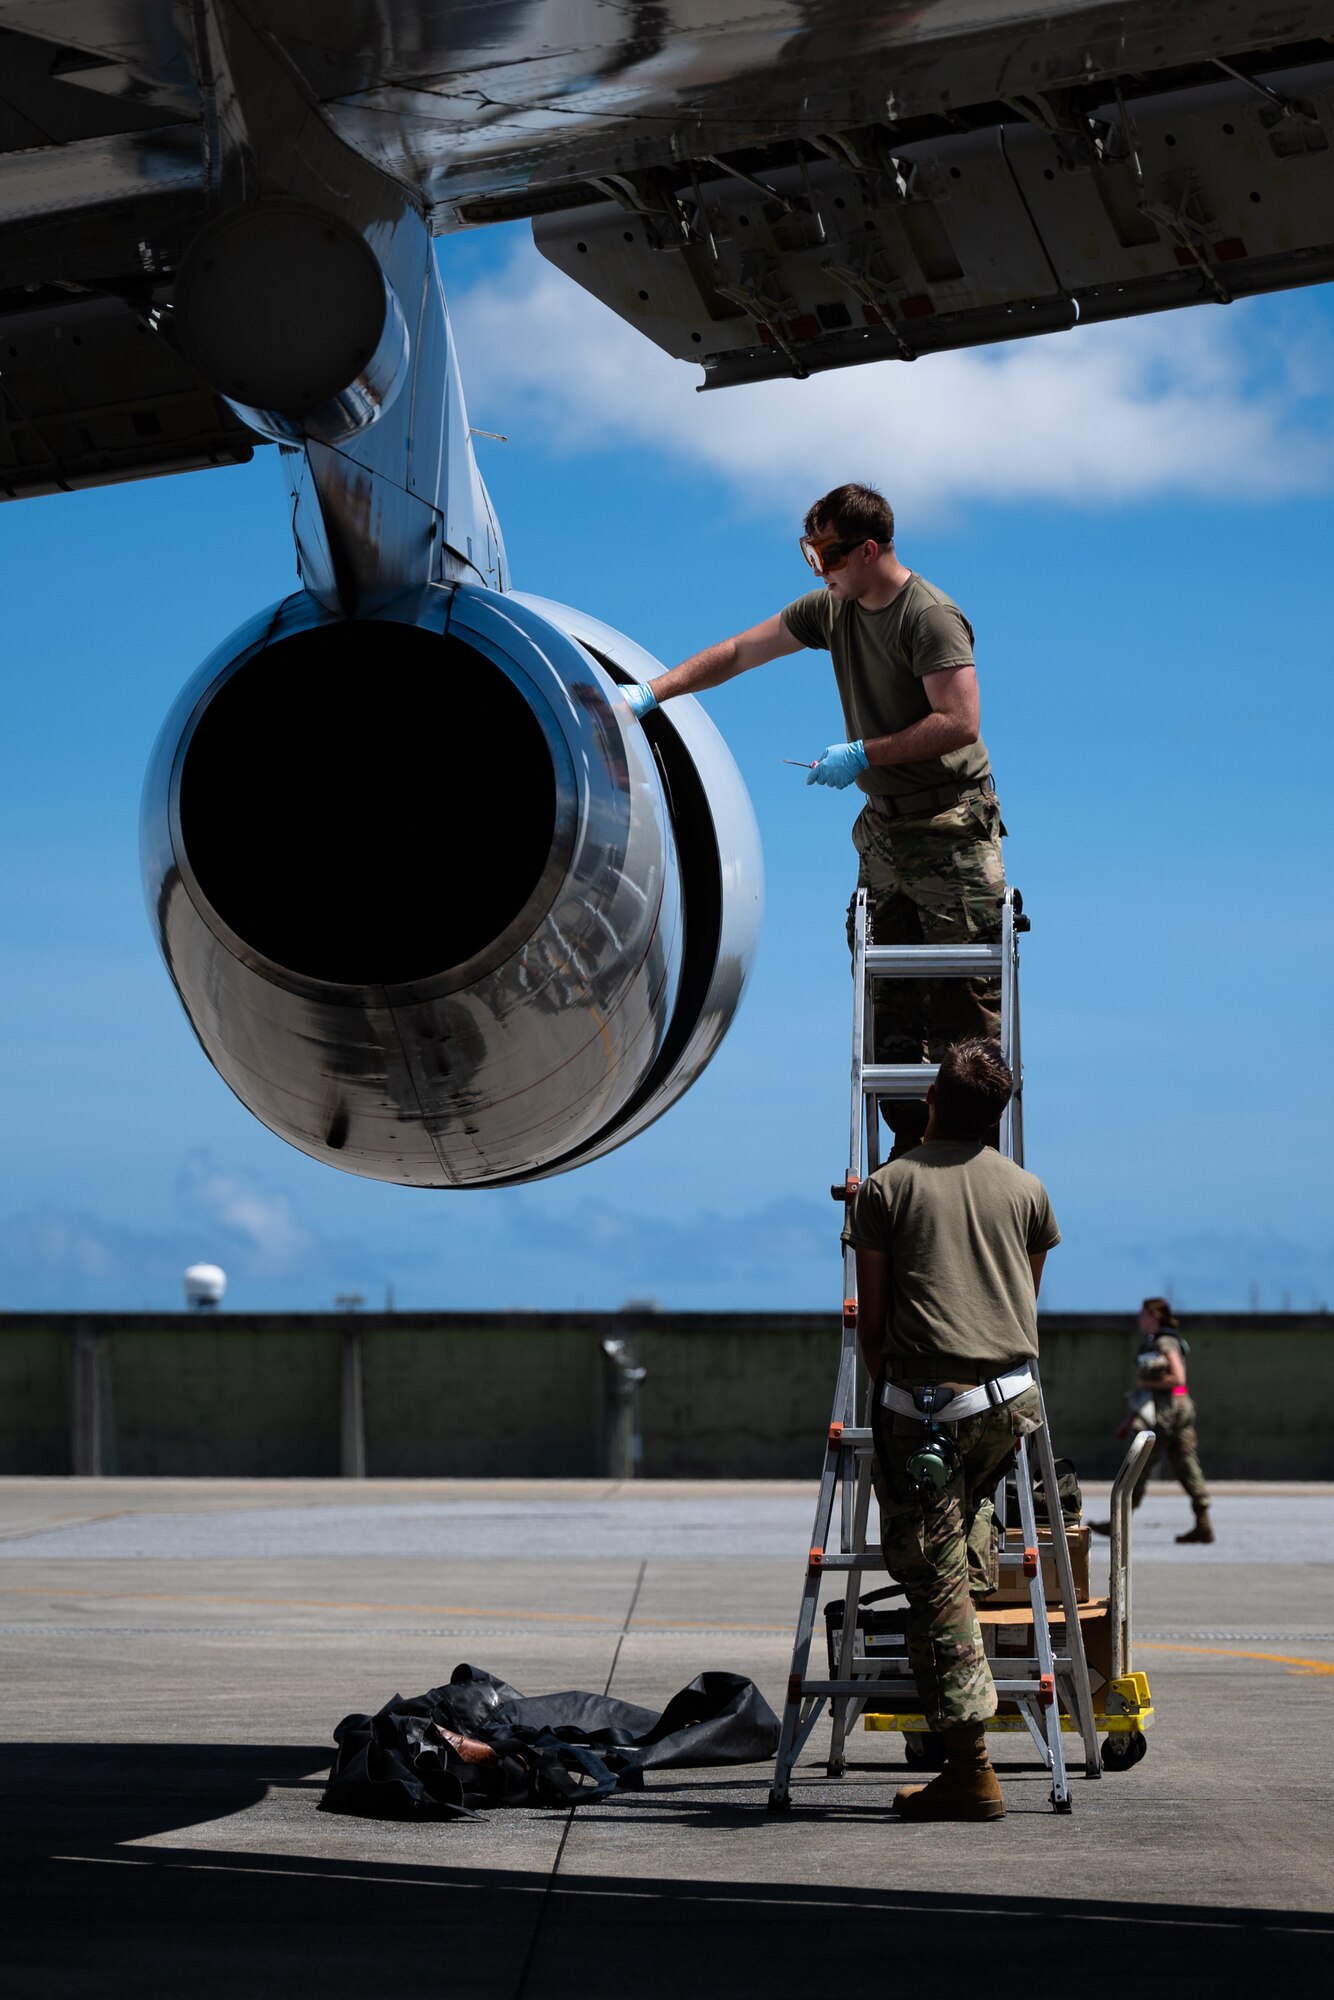 U.S. Air Force Airman 1st Class Andrew Foust, top, 961st Aircraft Maintenance Unit aerospace propulsion apprentice, and Airman 1st Class Trevor Fisher, bottom, 961st AMU aerospace propulsion apprentice, inspect an E-3 Sentry engine at Kadena Air Base, Japan, Aug. 30, 2021. The 961st AMU is under the 18th Aircraft Maintenance squadron, one of five squadrons under the 18th Maintenance Group. (U.S. Air Force photo by Airman 1st Class Stephen Pulter)